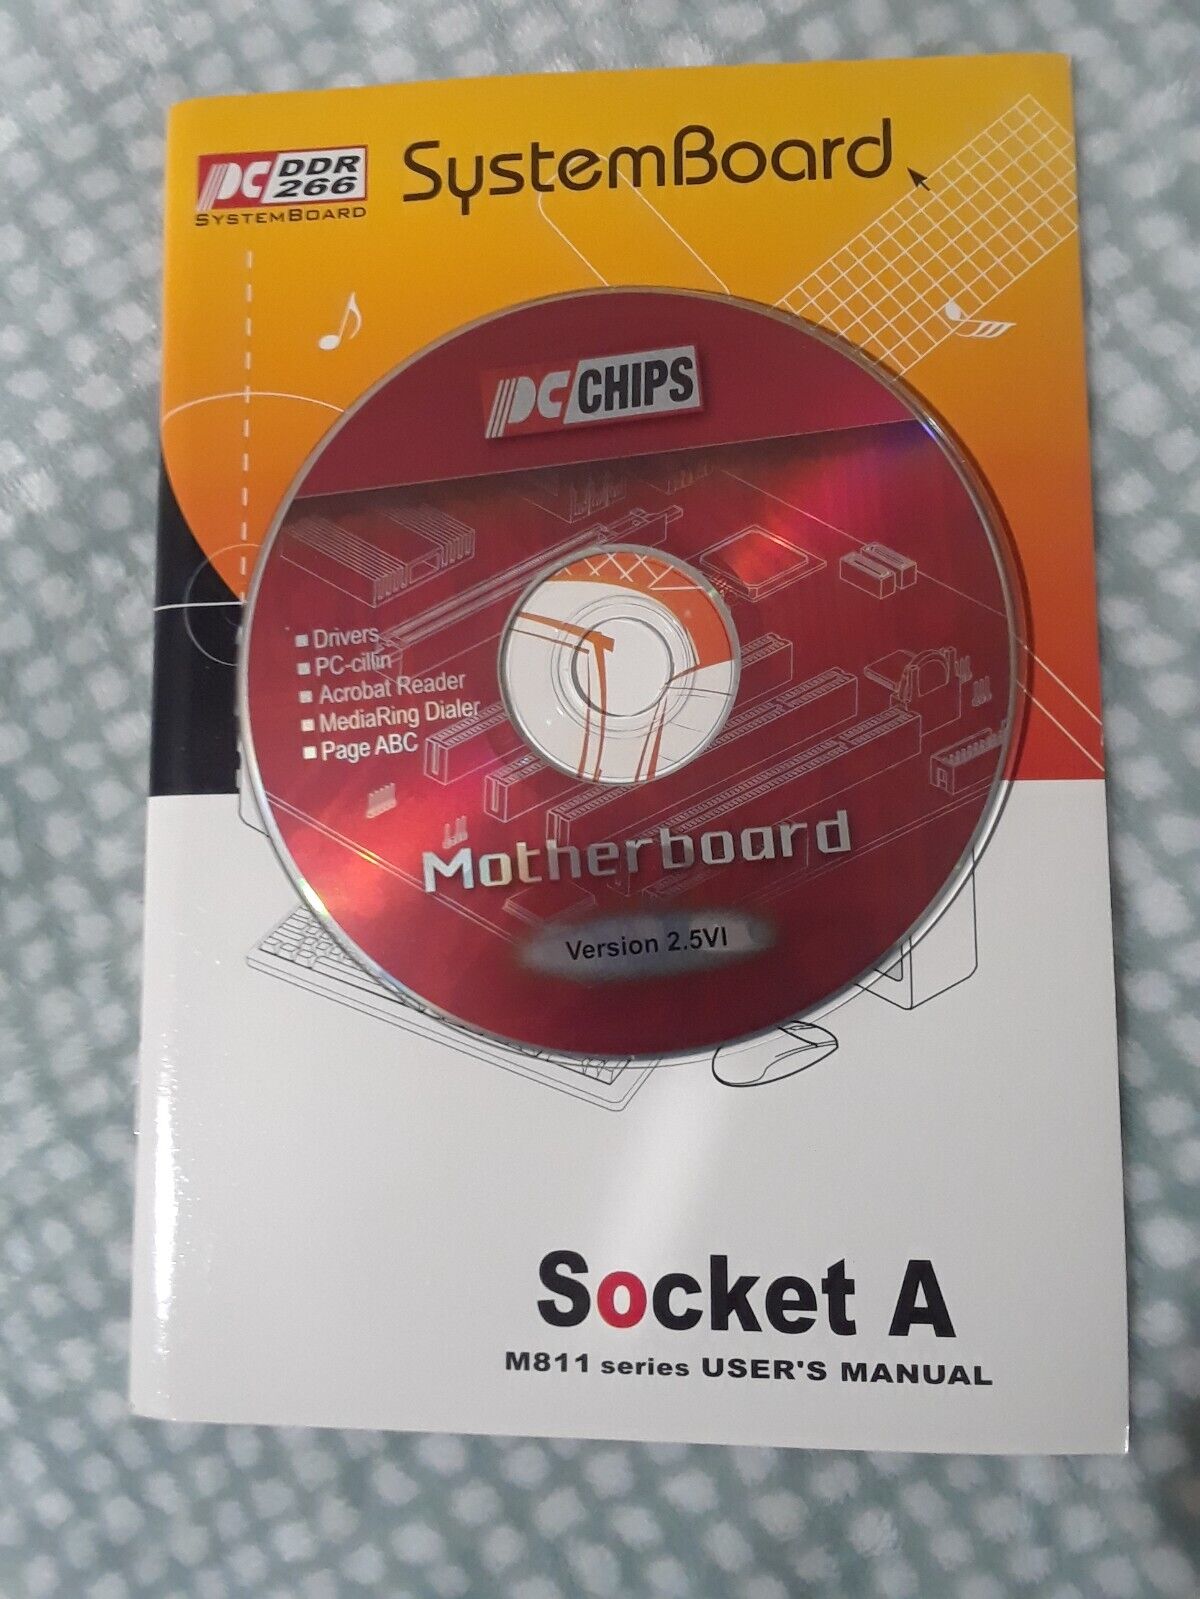 PCChips DDR266 M811 MB User's Manual and Driver CD